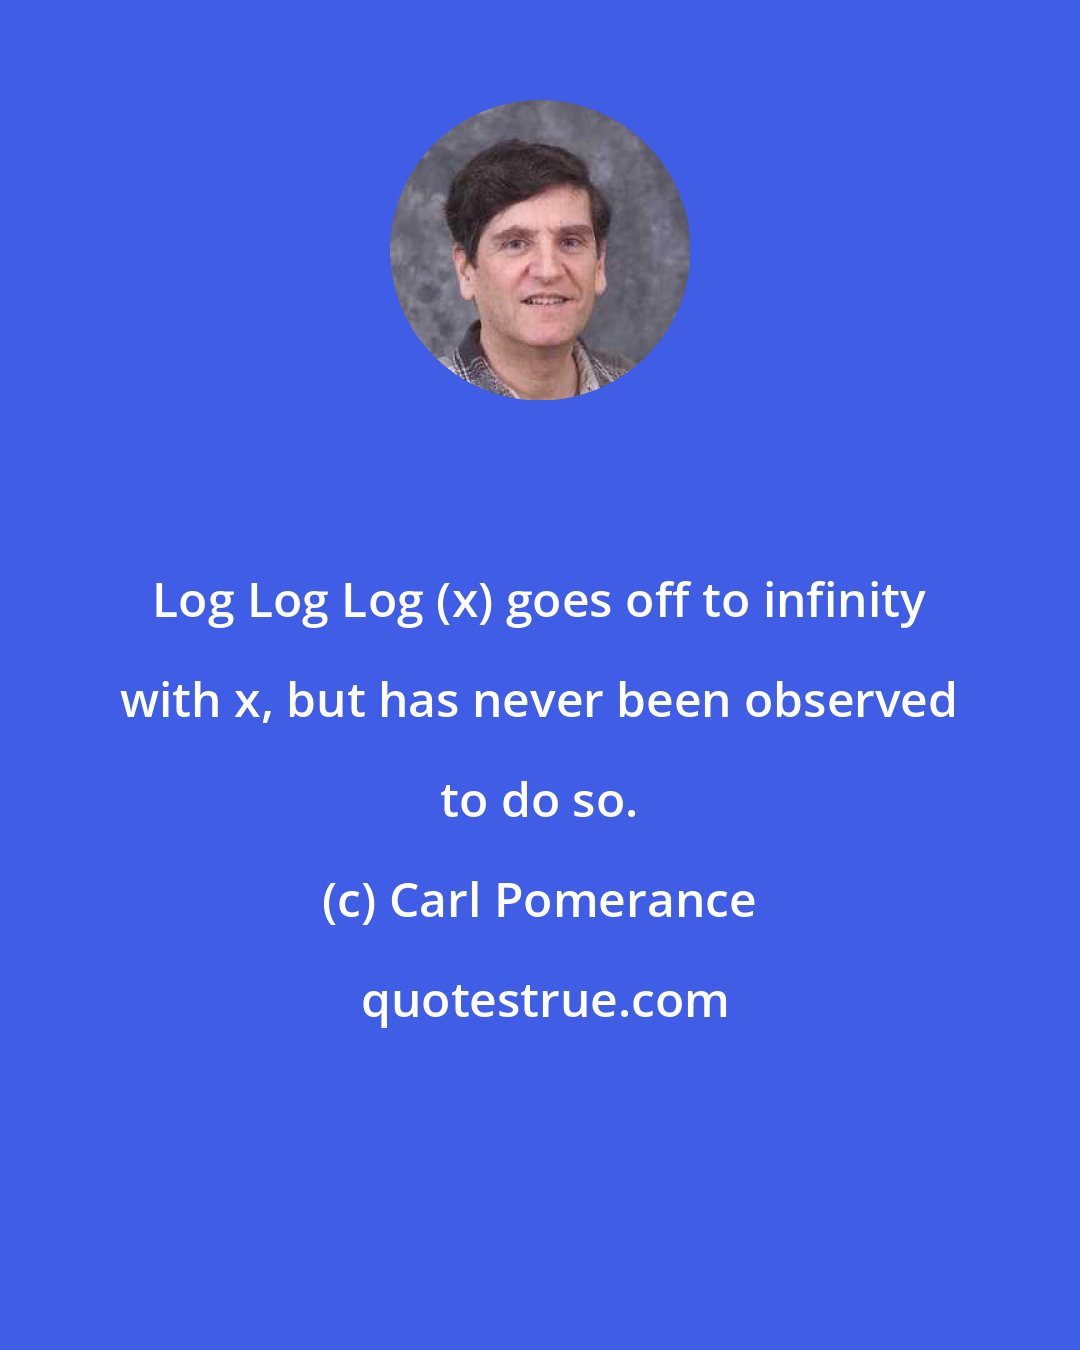 Carl Pomerance: Log Log Log (x) goes off to infinity with x, but has never been observed to do so.